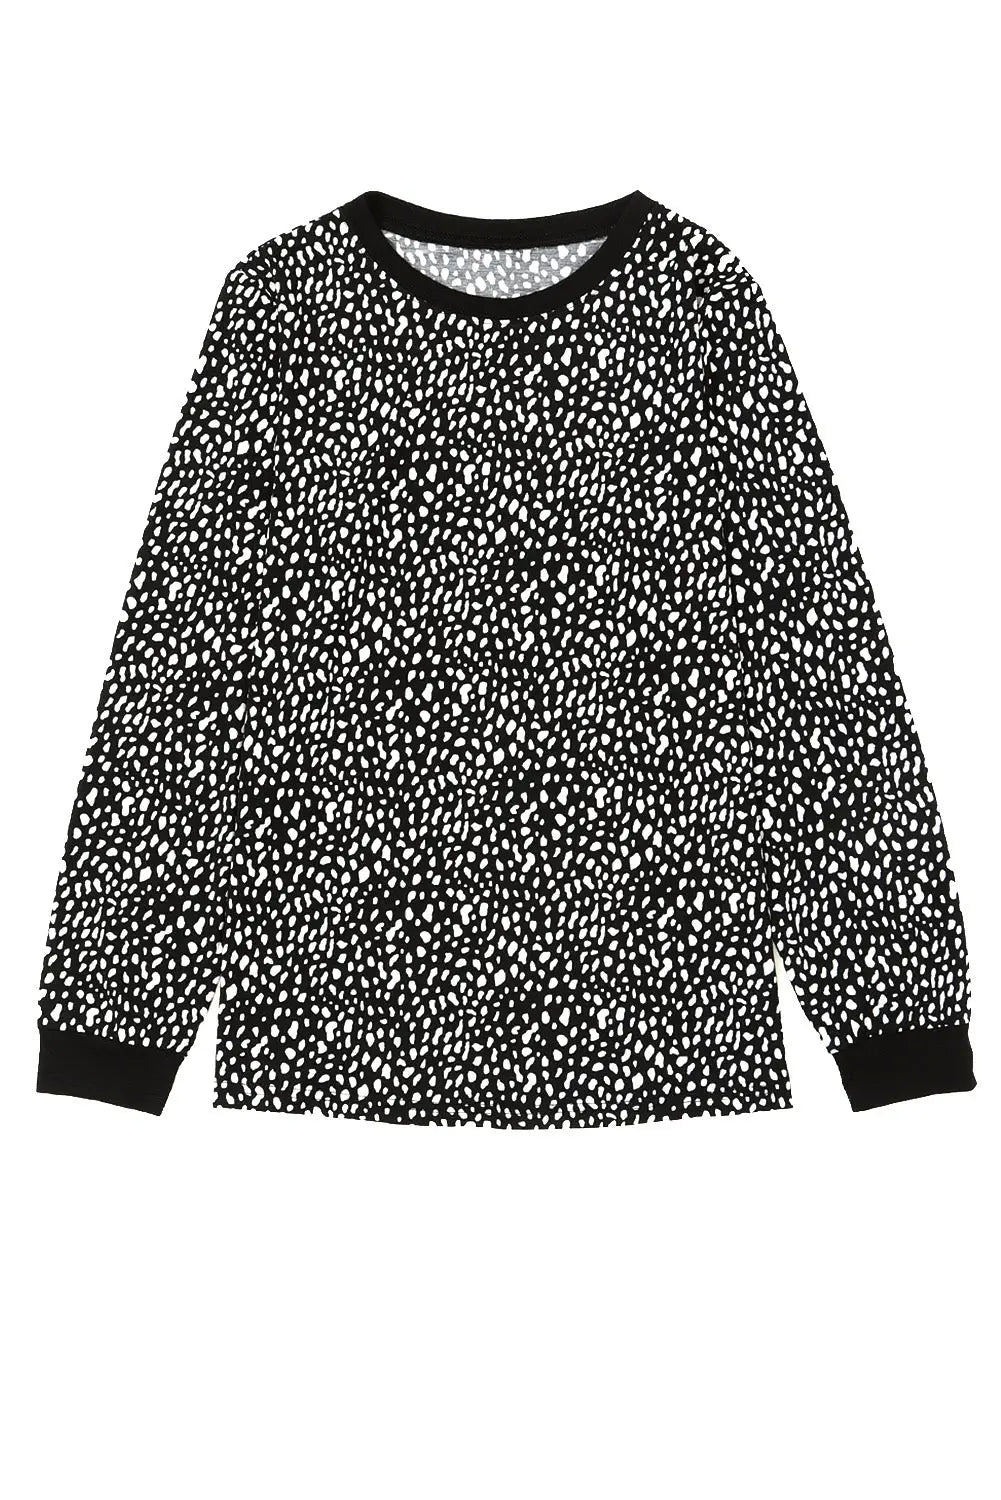 Animal Spotted Print Round Neck Long Sleeve Top-23